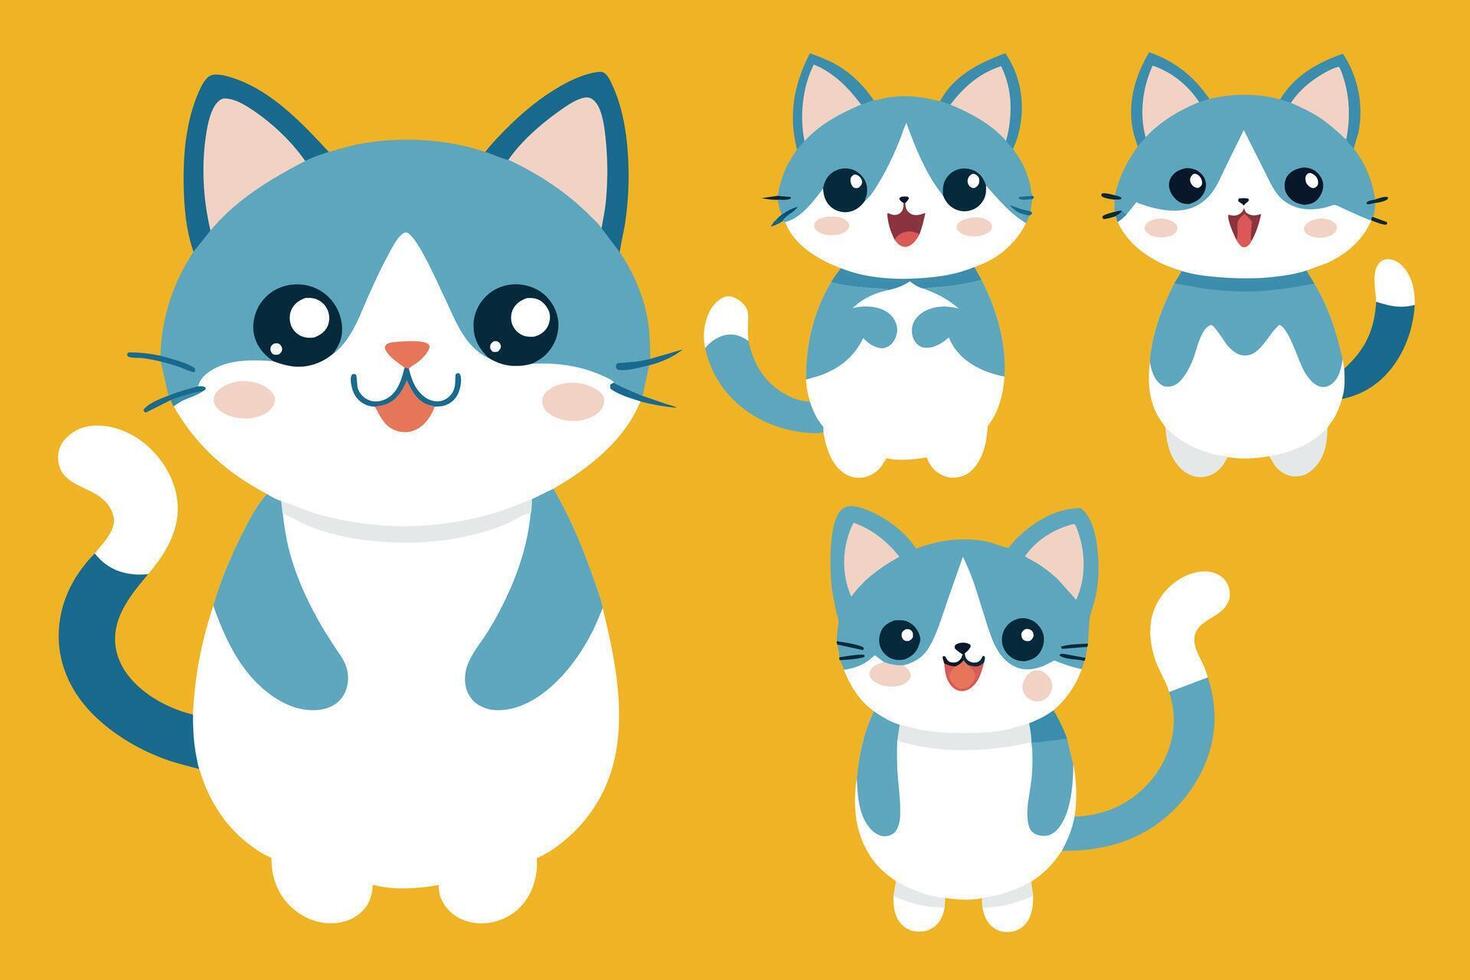 Set of cute cat in different poses cartoon illustration vector